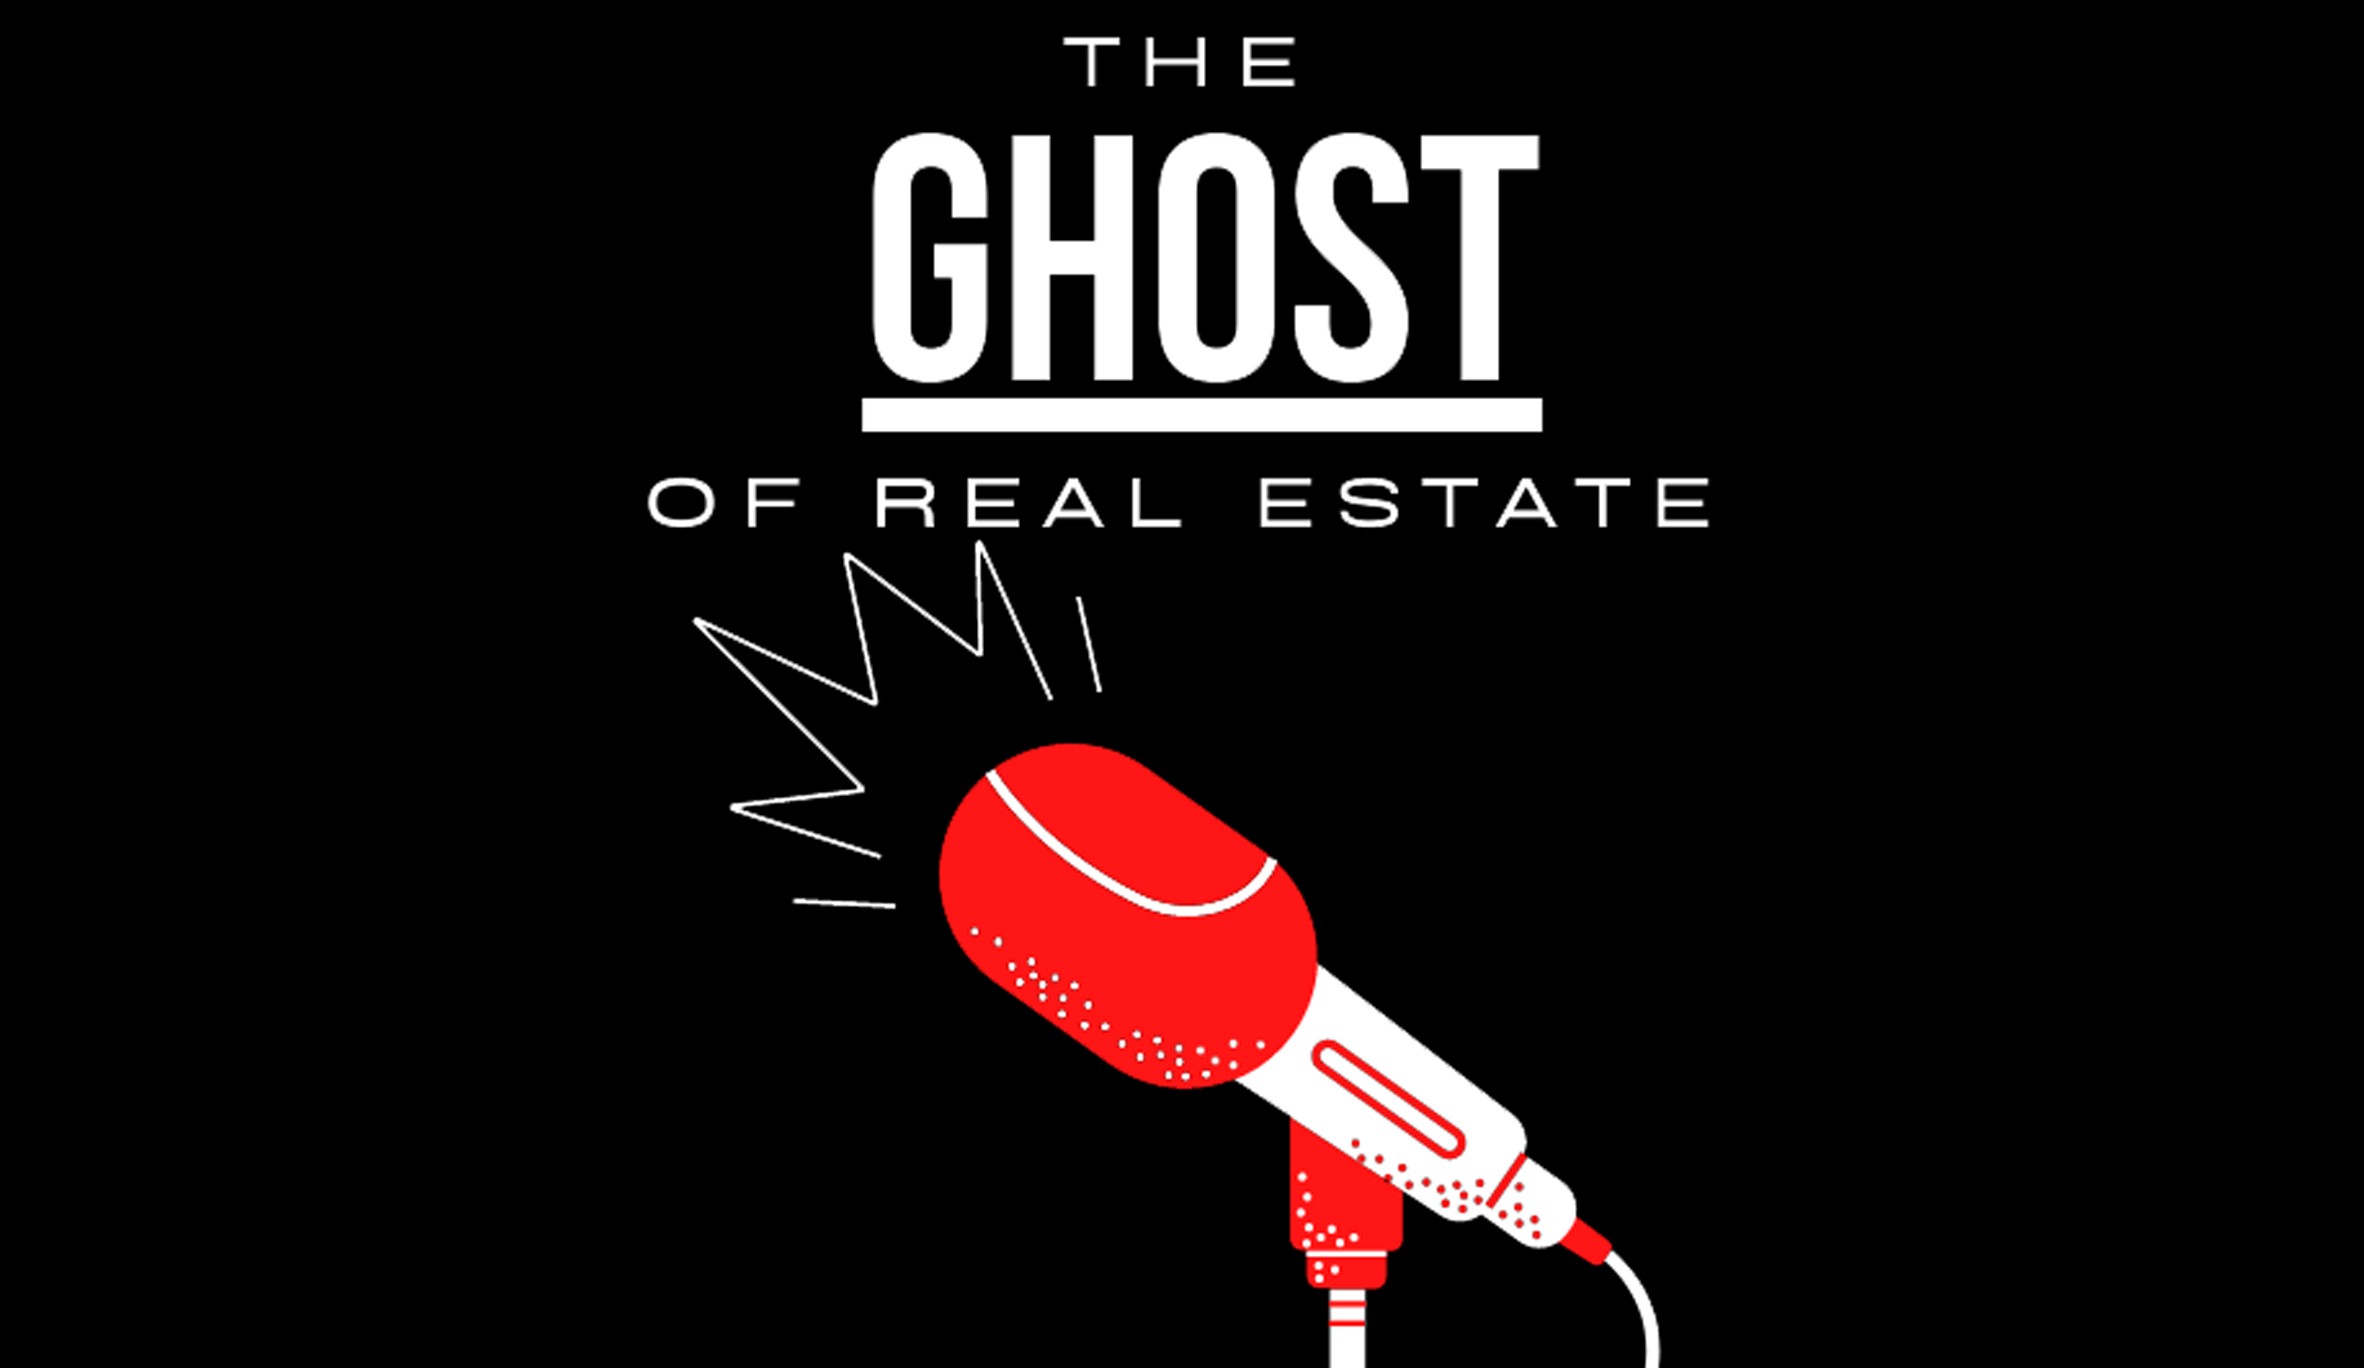 The Ghost of Real Estate